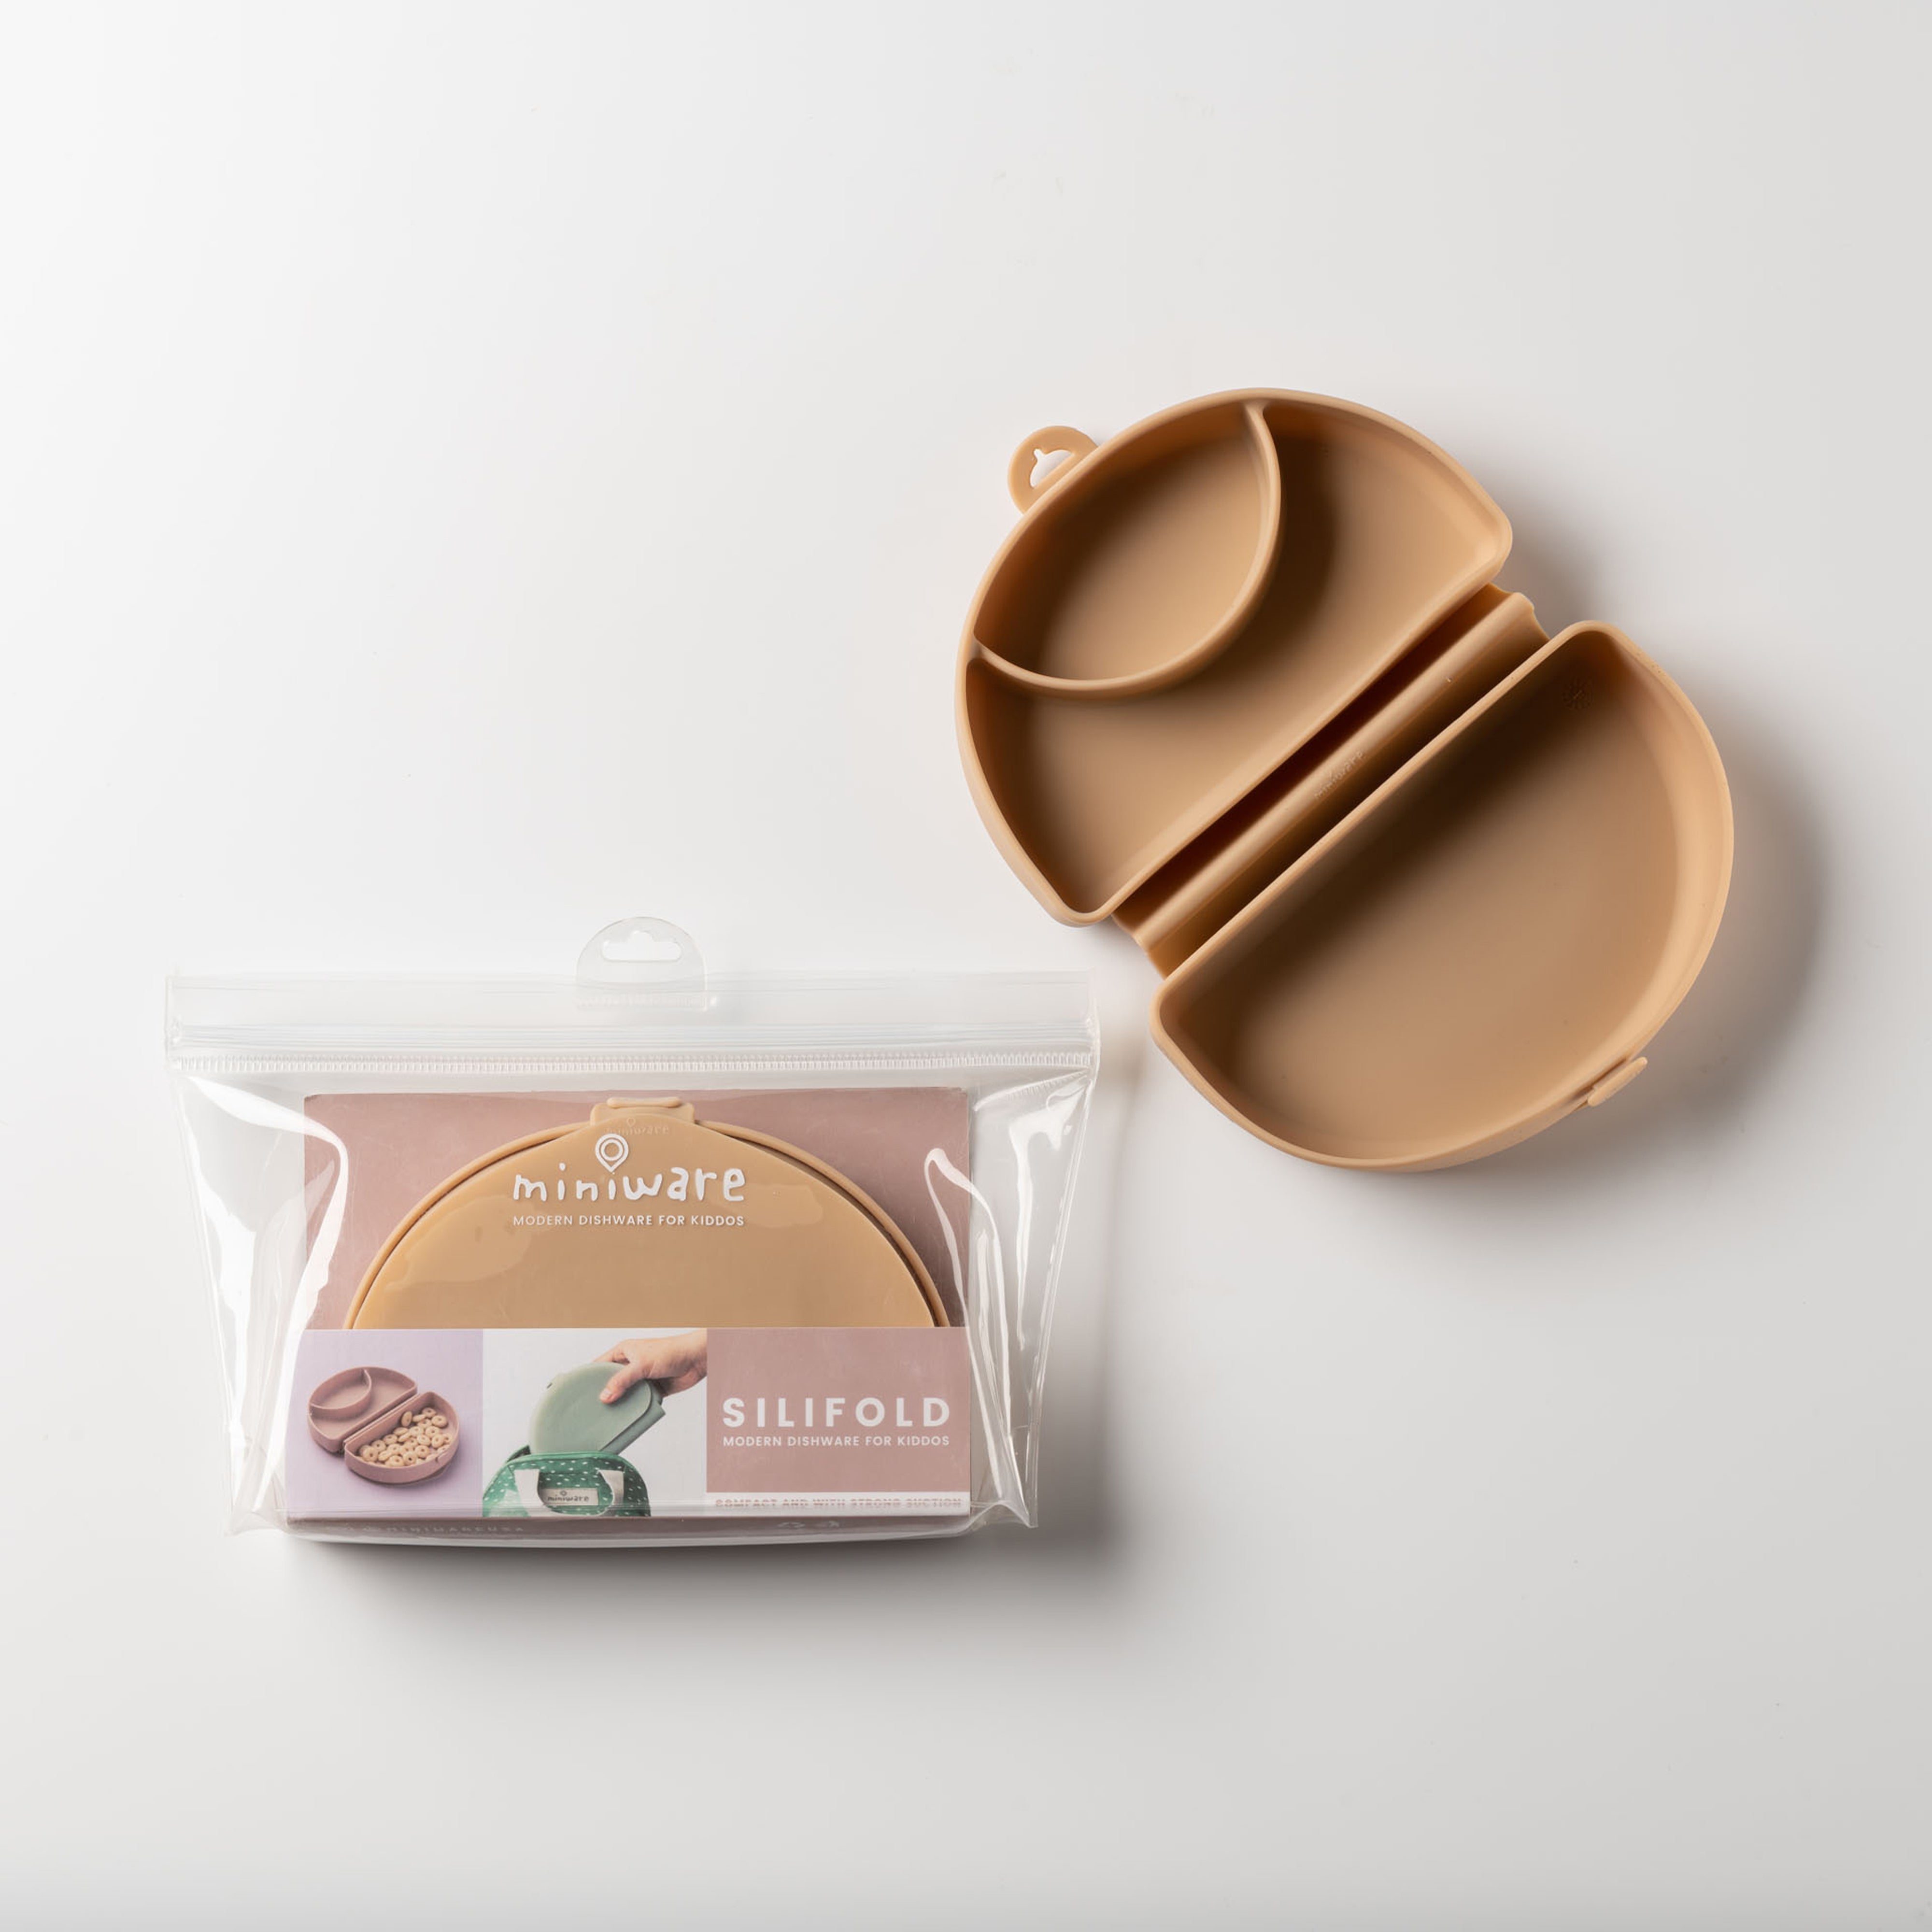 miniware-silifold-folding-silicone-lunch-box-almond-butter-brown- (1)